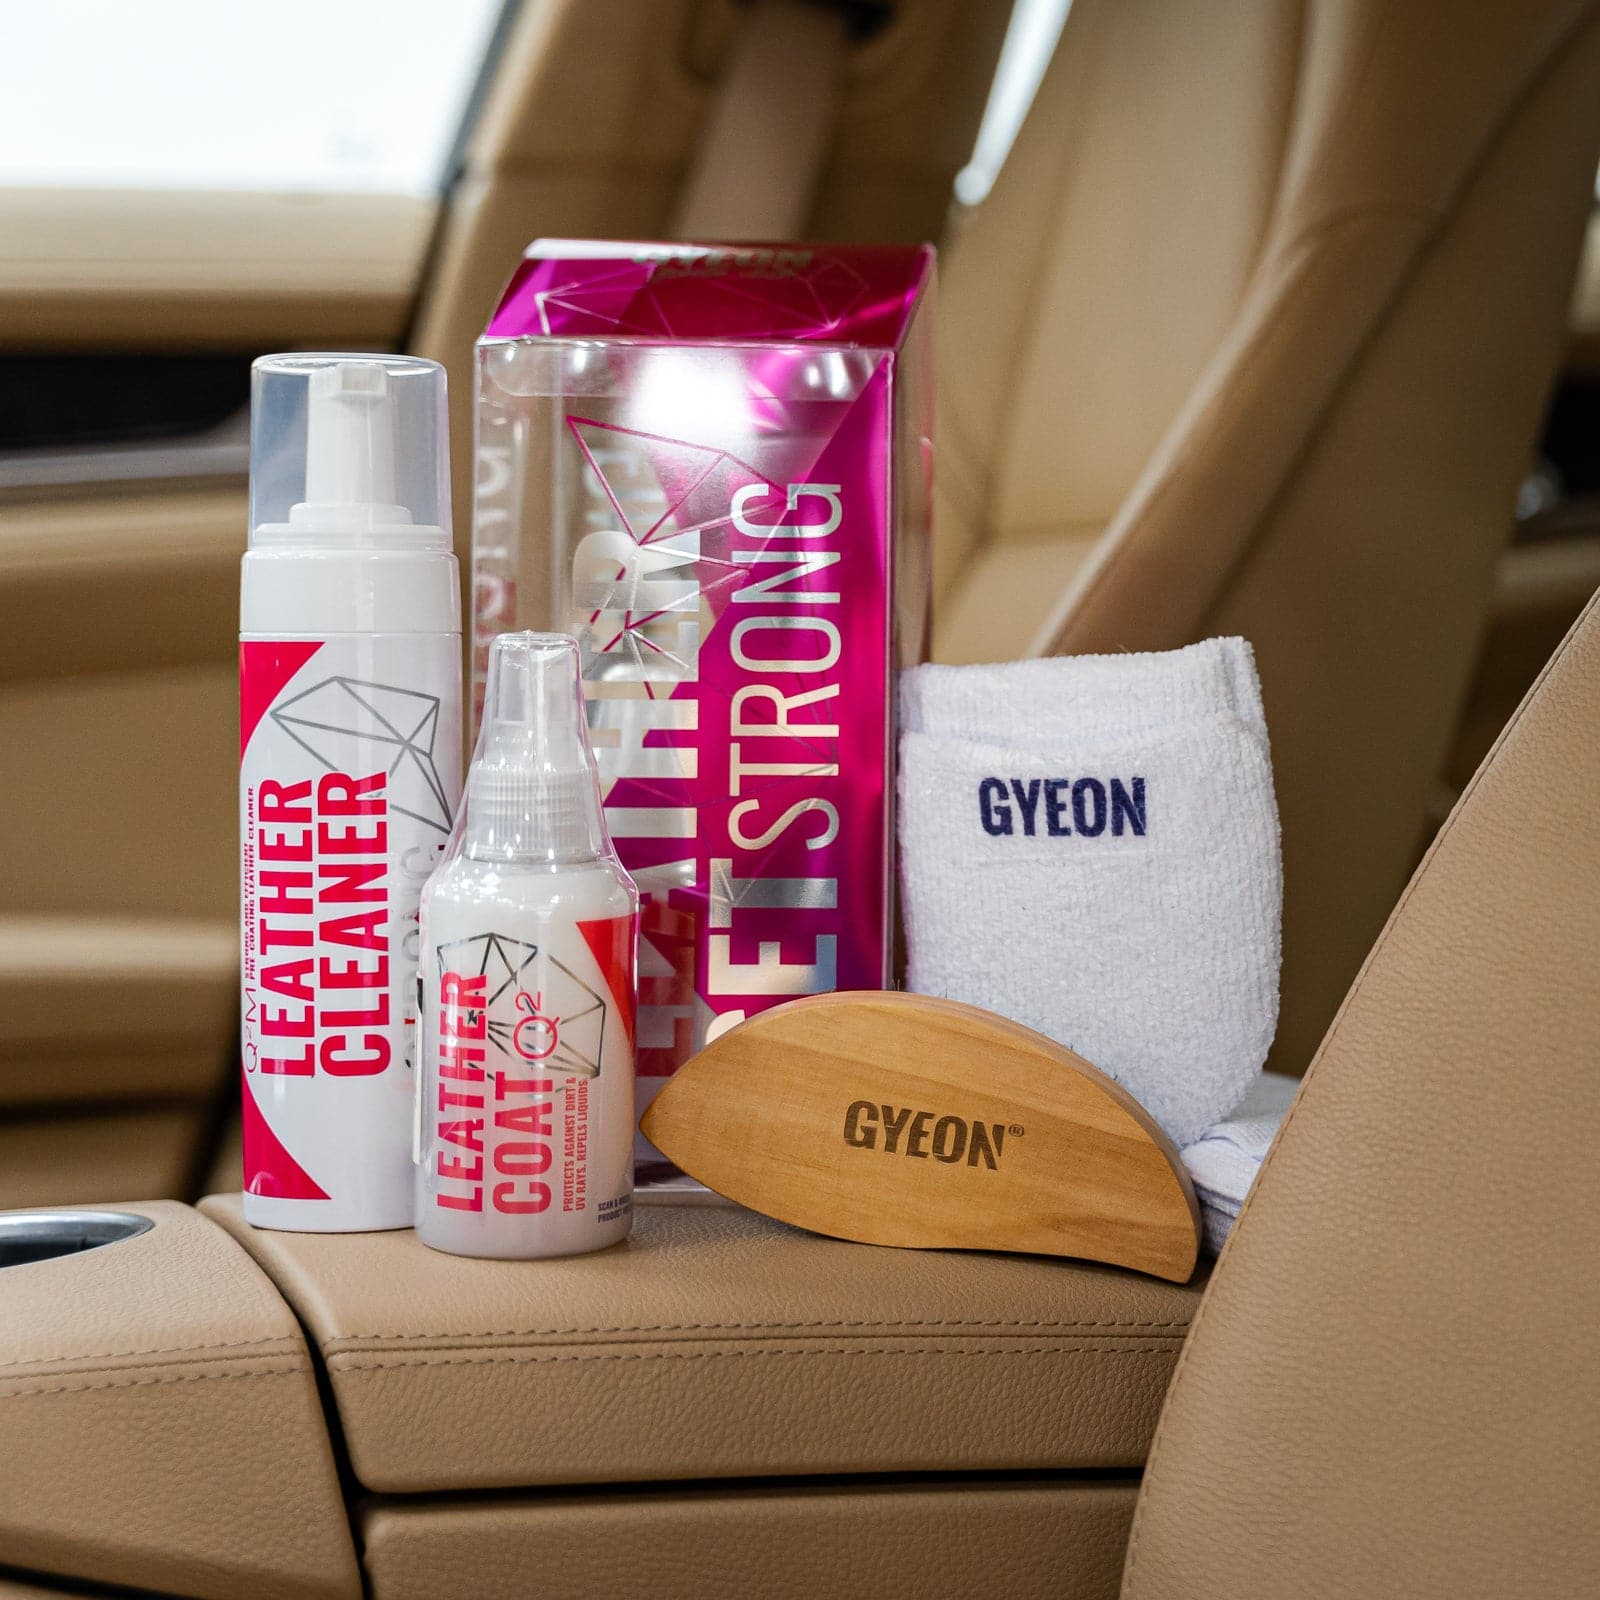 GYEON Quartz Q²M LeatherCleaner Strong 500 ml - Gentle Leather Cleaner Safe  for All Leather Types - Remove Dirt and Oil from All Leather to Prepare